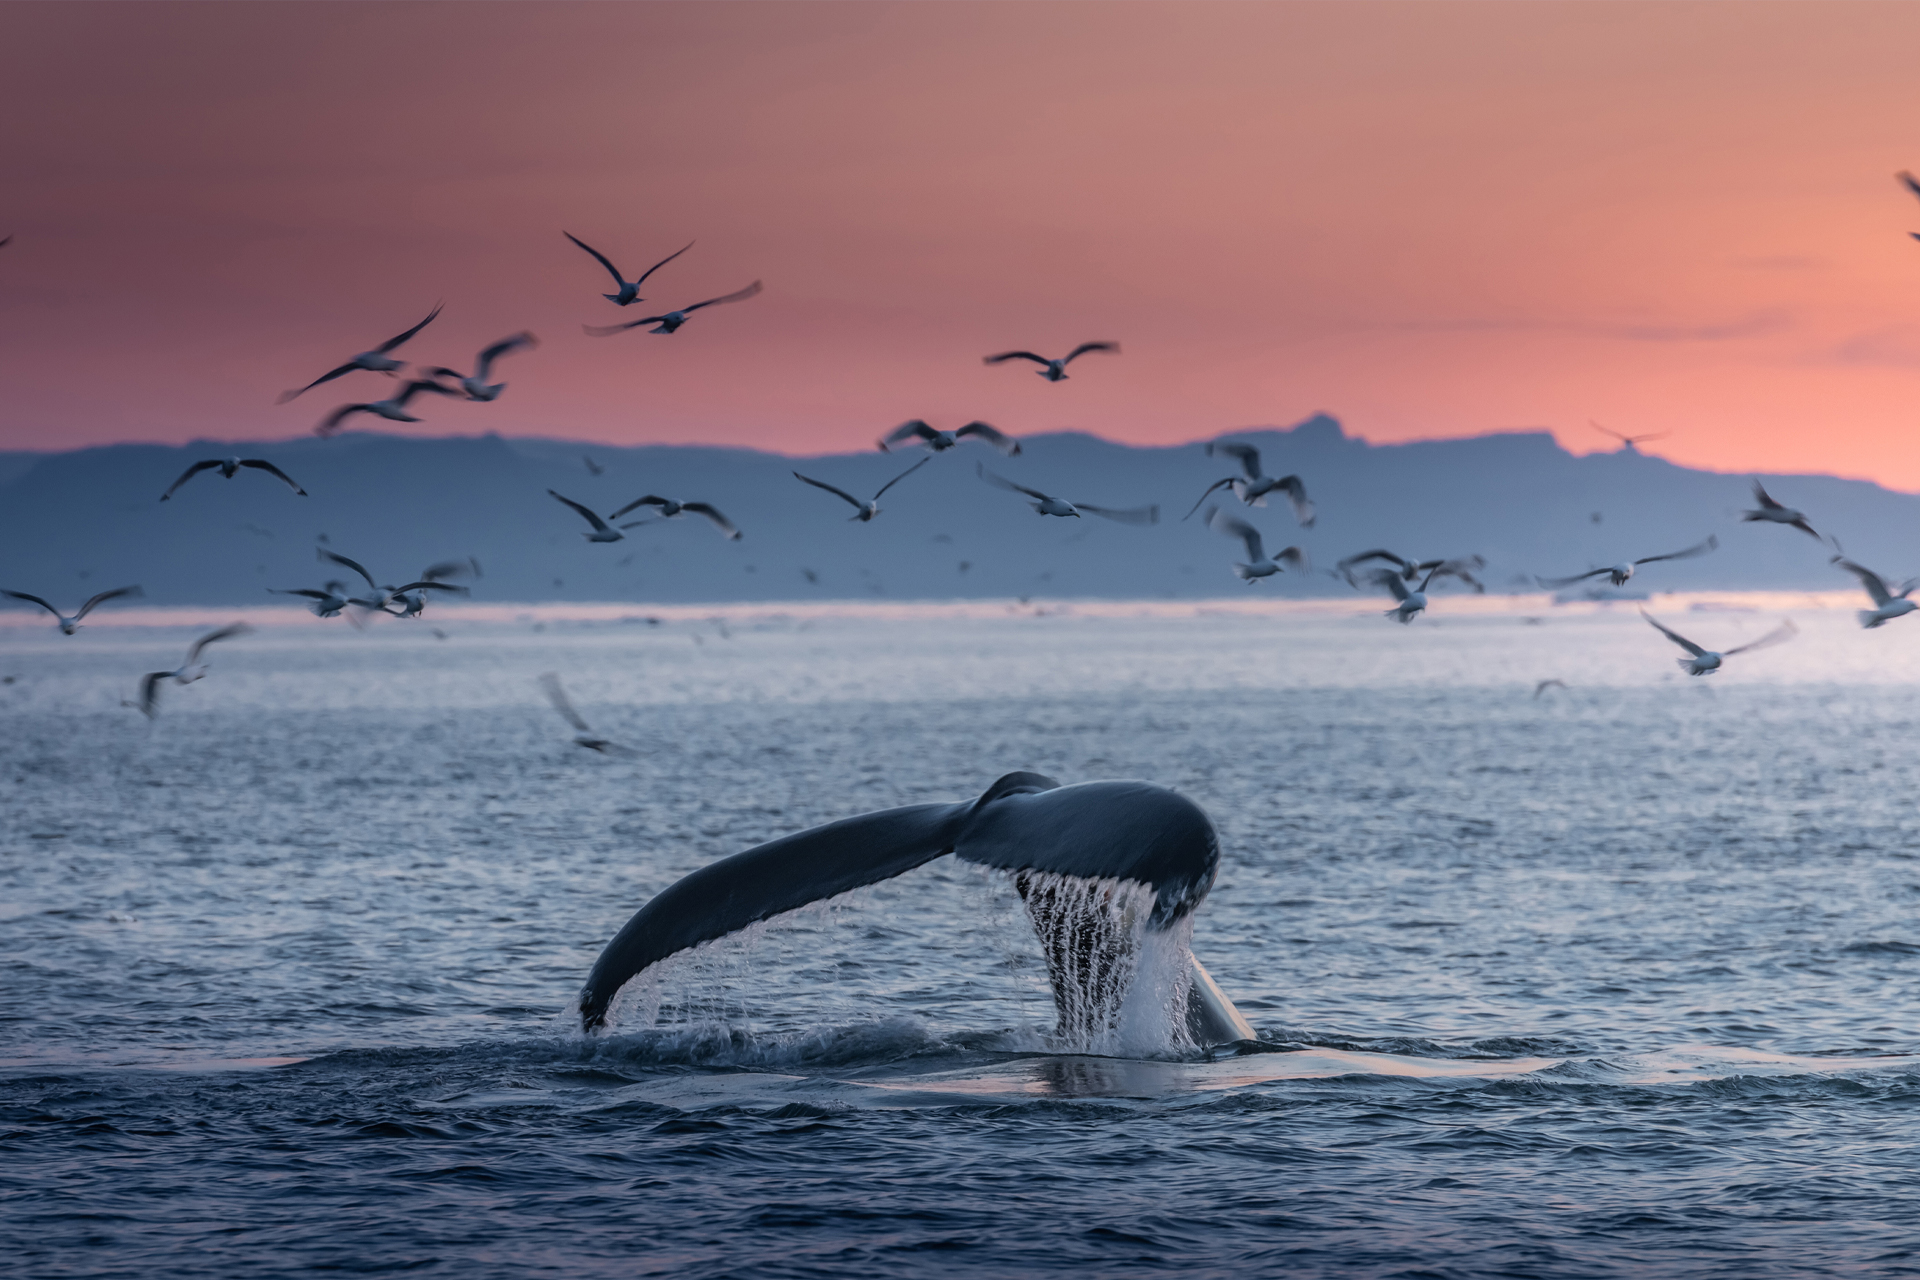 Tail of Humpback whale at sunset